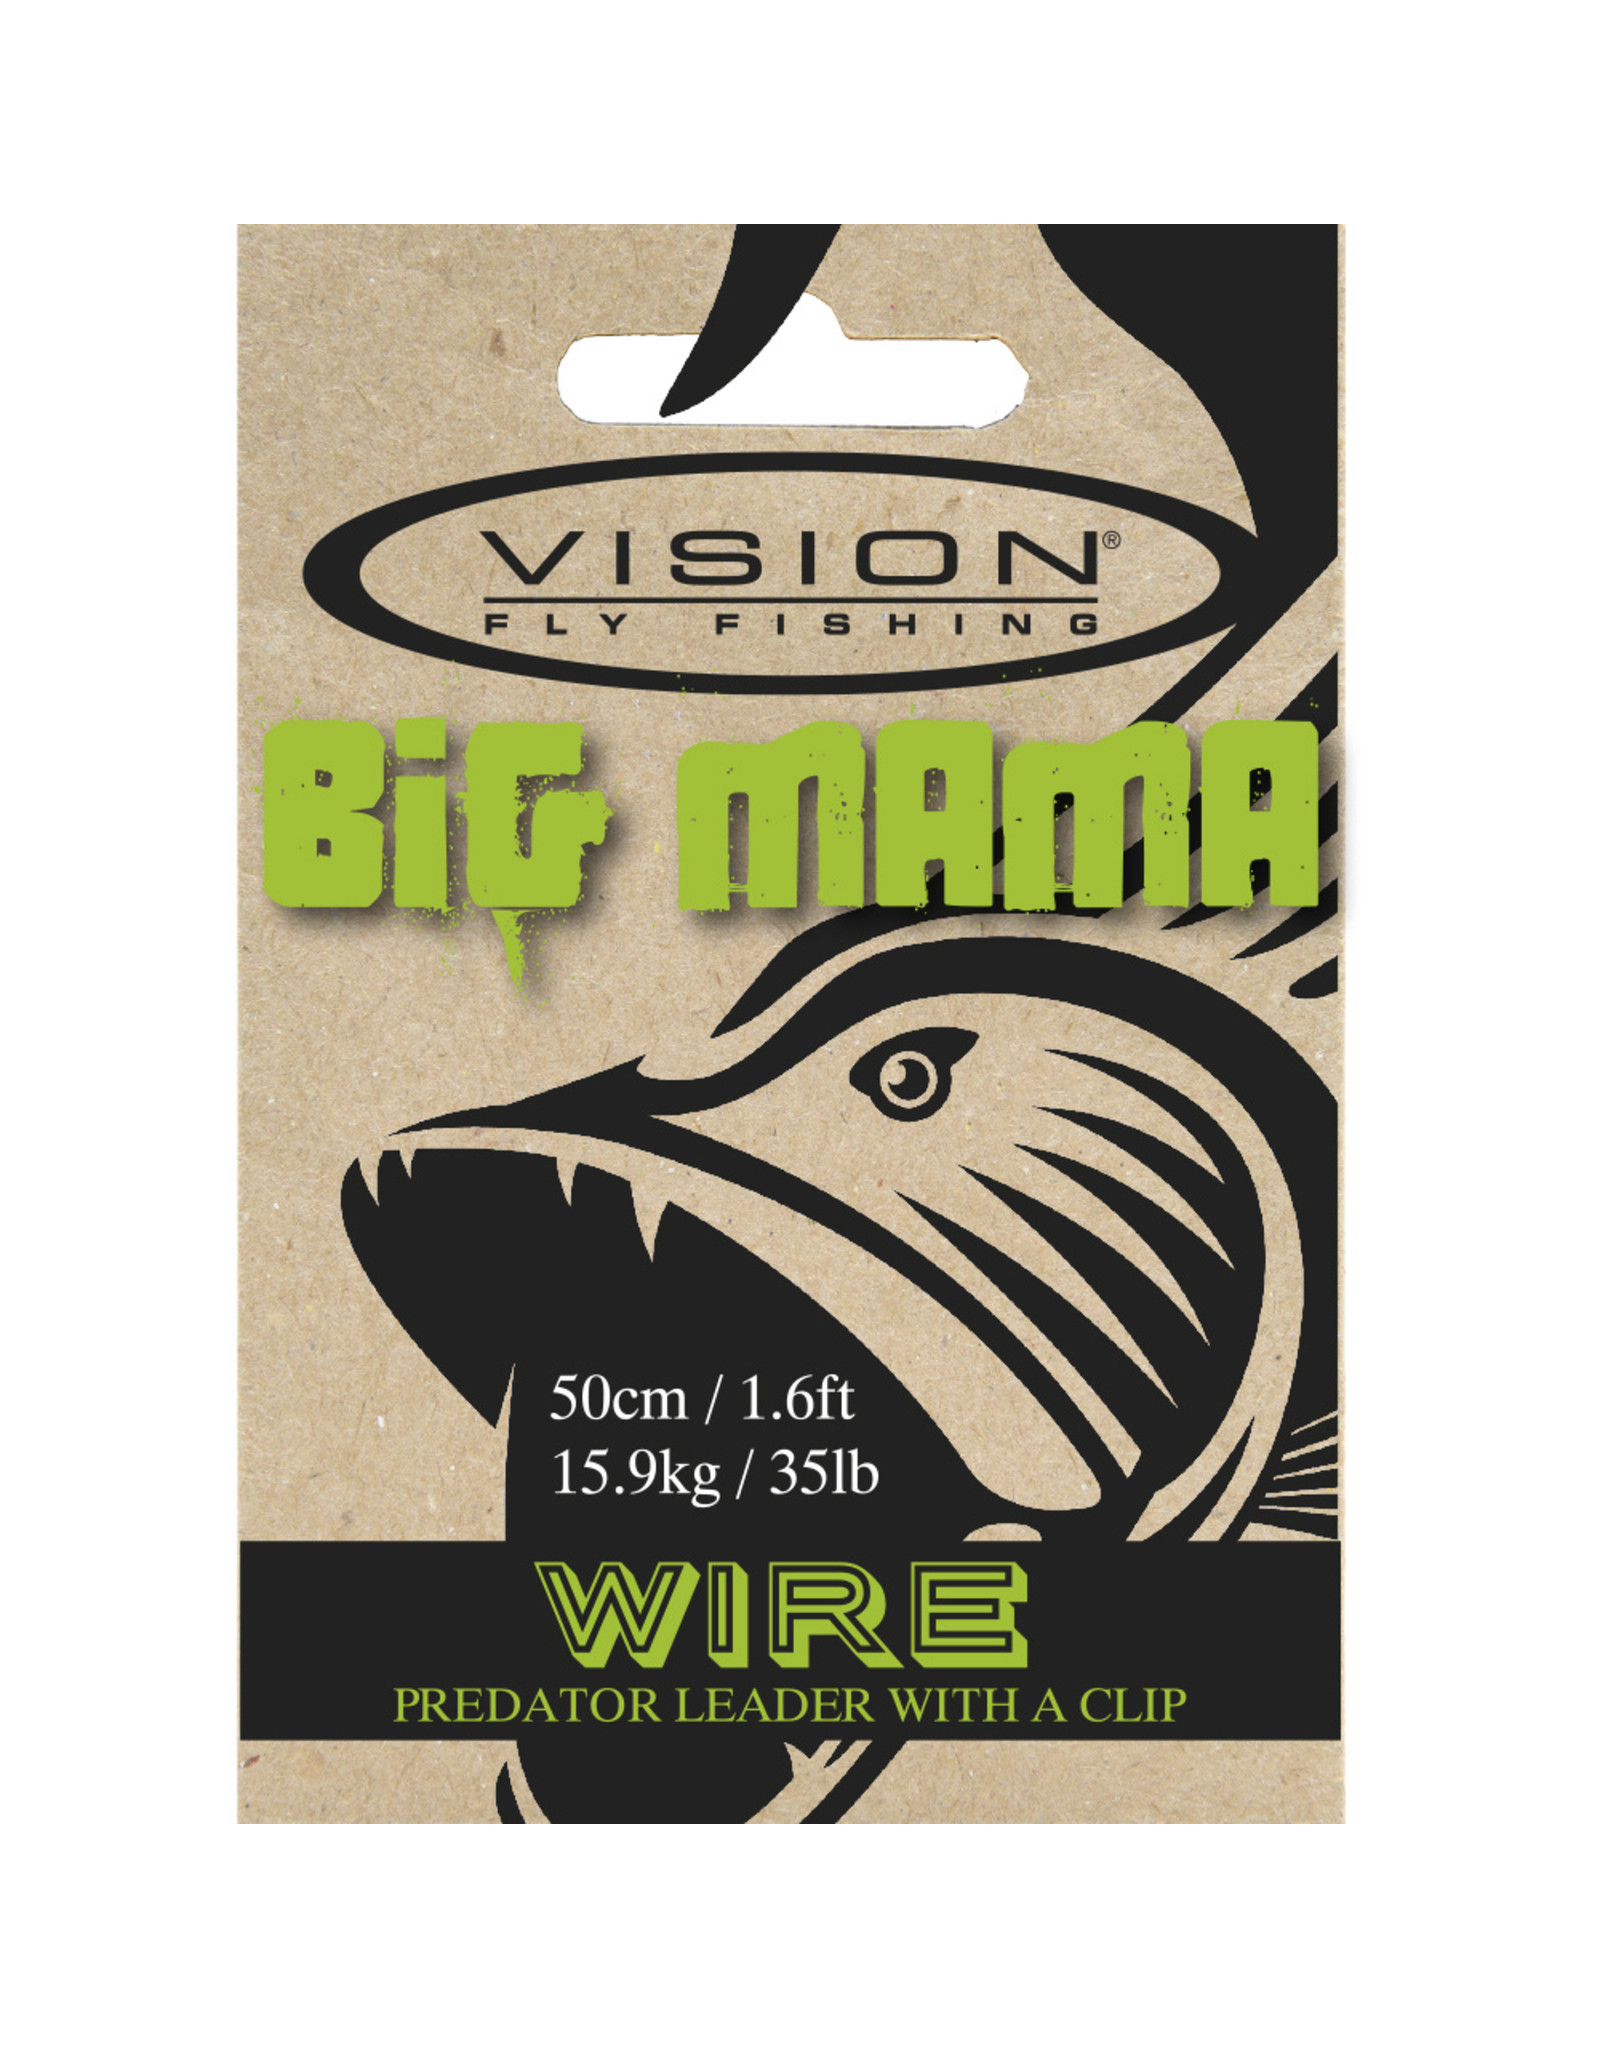 VISION FLY FISHING BIG MAMA WIRE LEADER